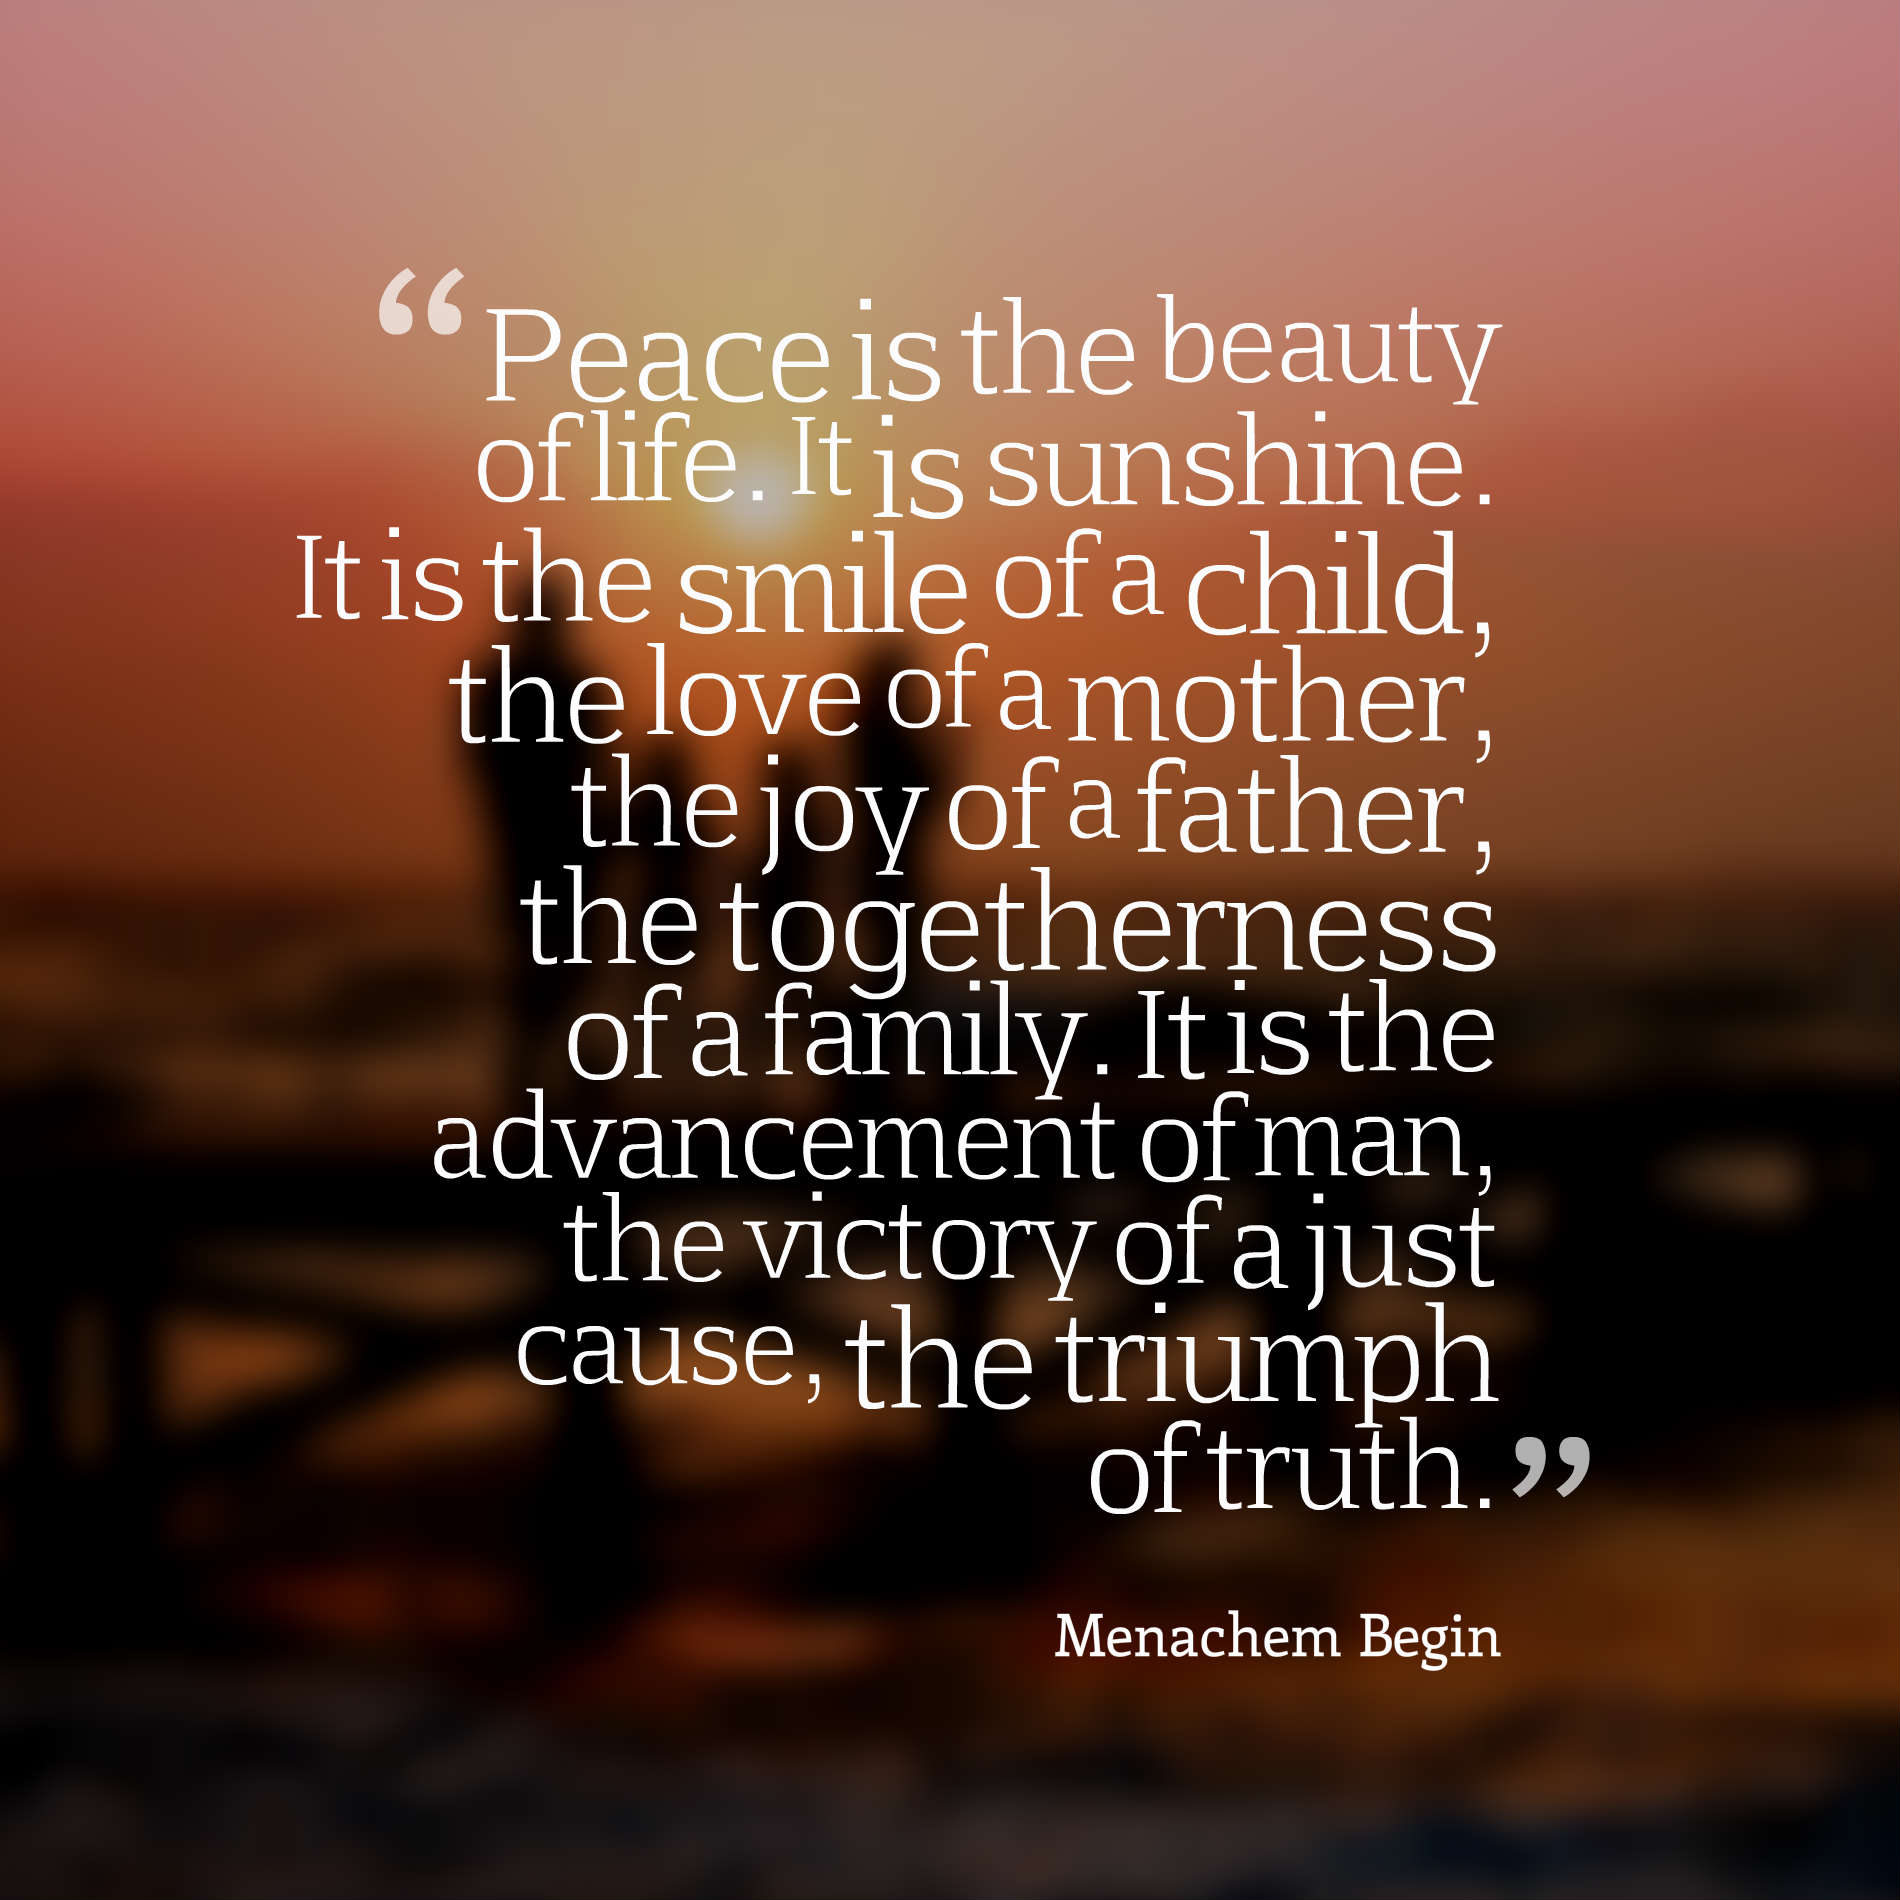 Peace is the beauty of life. It is sunshine. It is the smile of a child, the love of a mother, the joy of a father, the togetherness of a family. It is the advancement of man, the victory of a just cause, the triumph of truth.